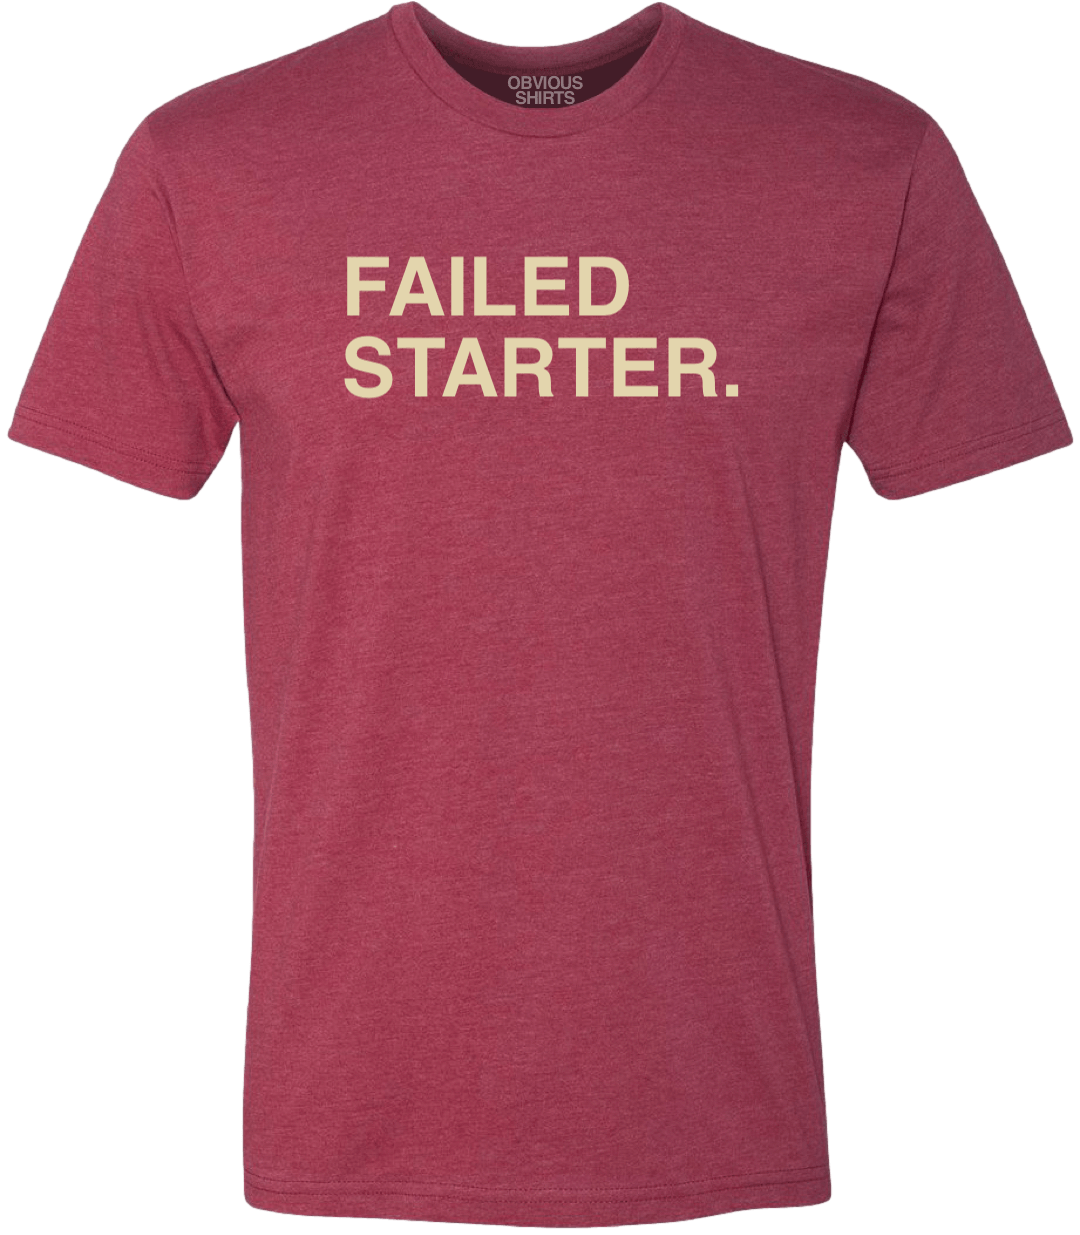 FAILED STARTER. - OBVIOUS SHIRTS